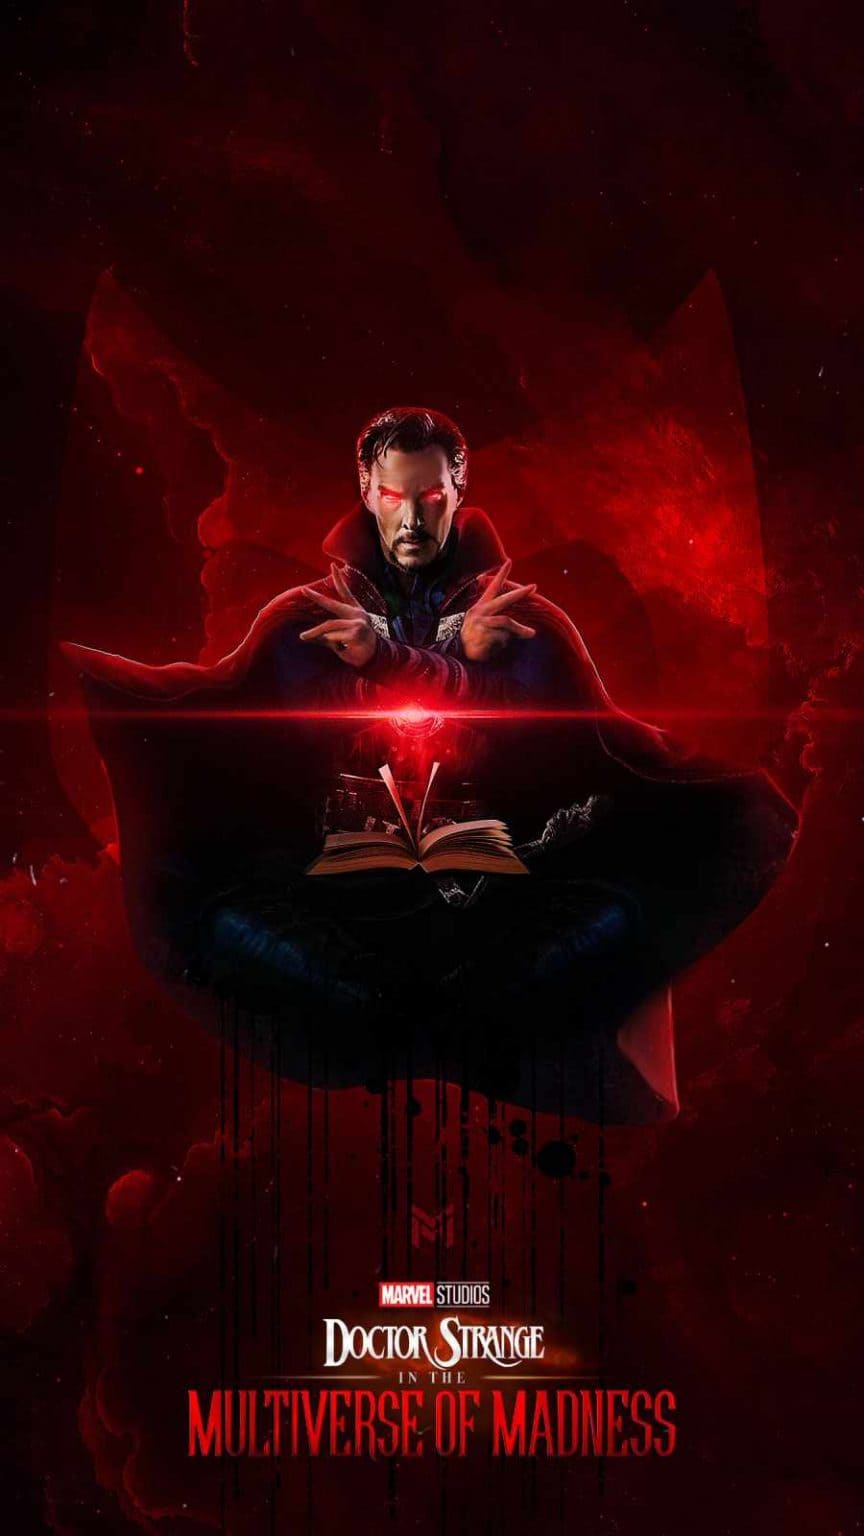 Doctor strange in the multiverse of madness iphone 13 pro max wallpaper, Best iPhone Wallpaper and iPhone background, WallpaperUpdate, Best iPhone Wallpaper and iPhone background